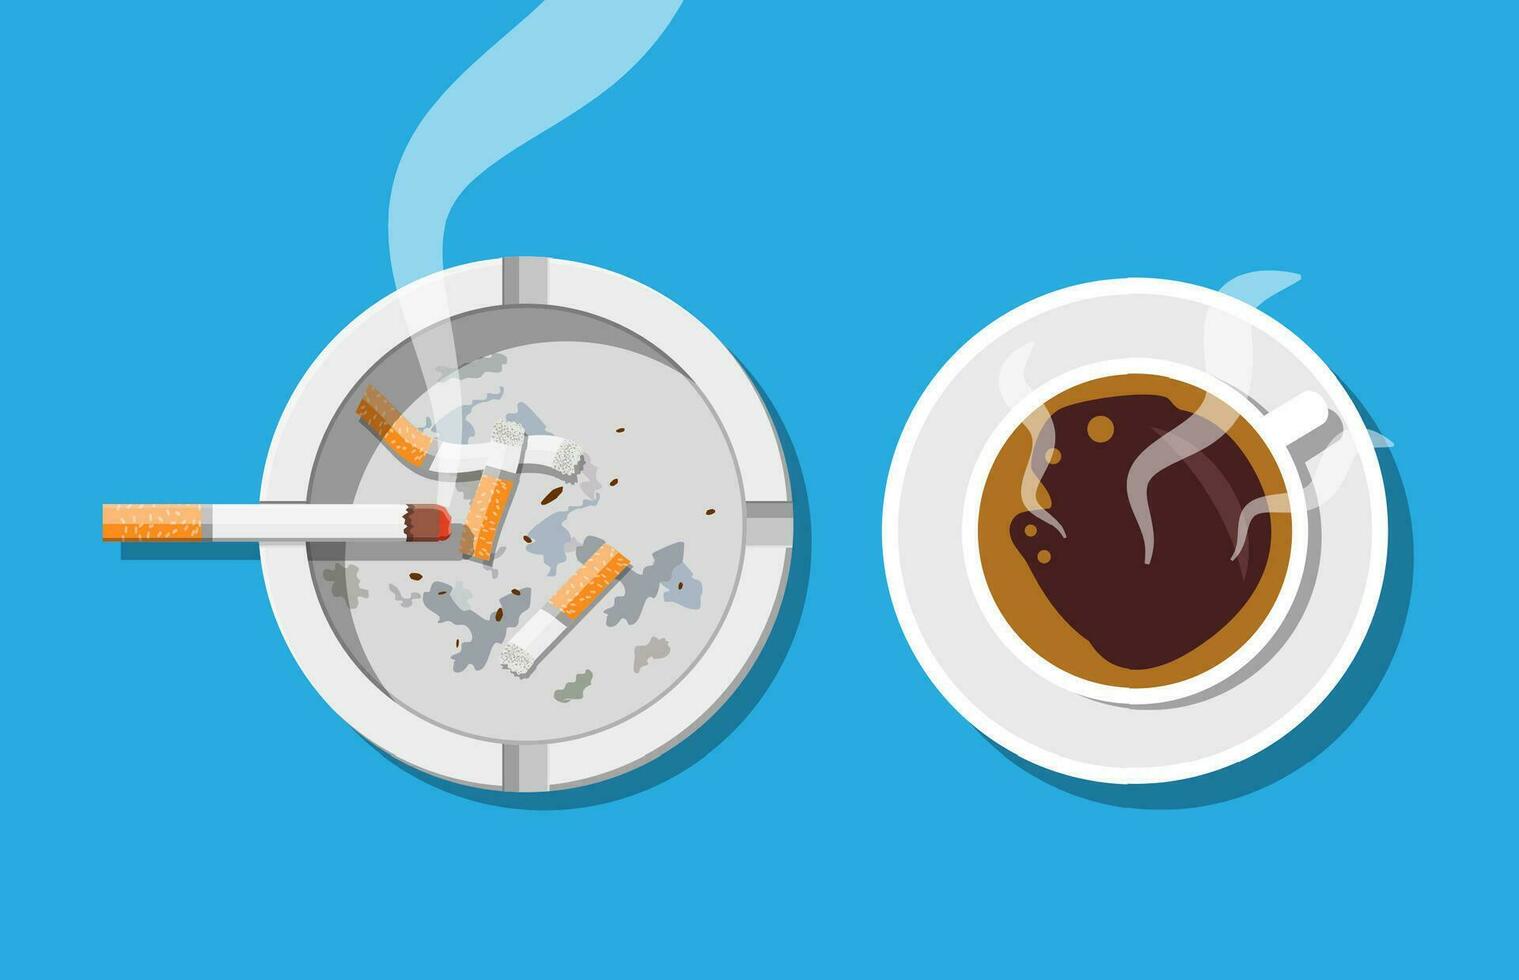 Coffee cup and ashtray full of smokes cigarettes. Unhealthy lifestyle. Vector illustration in flat style